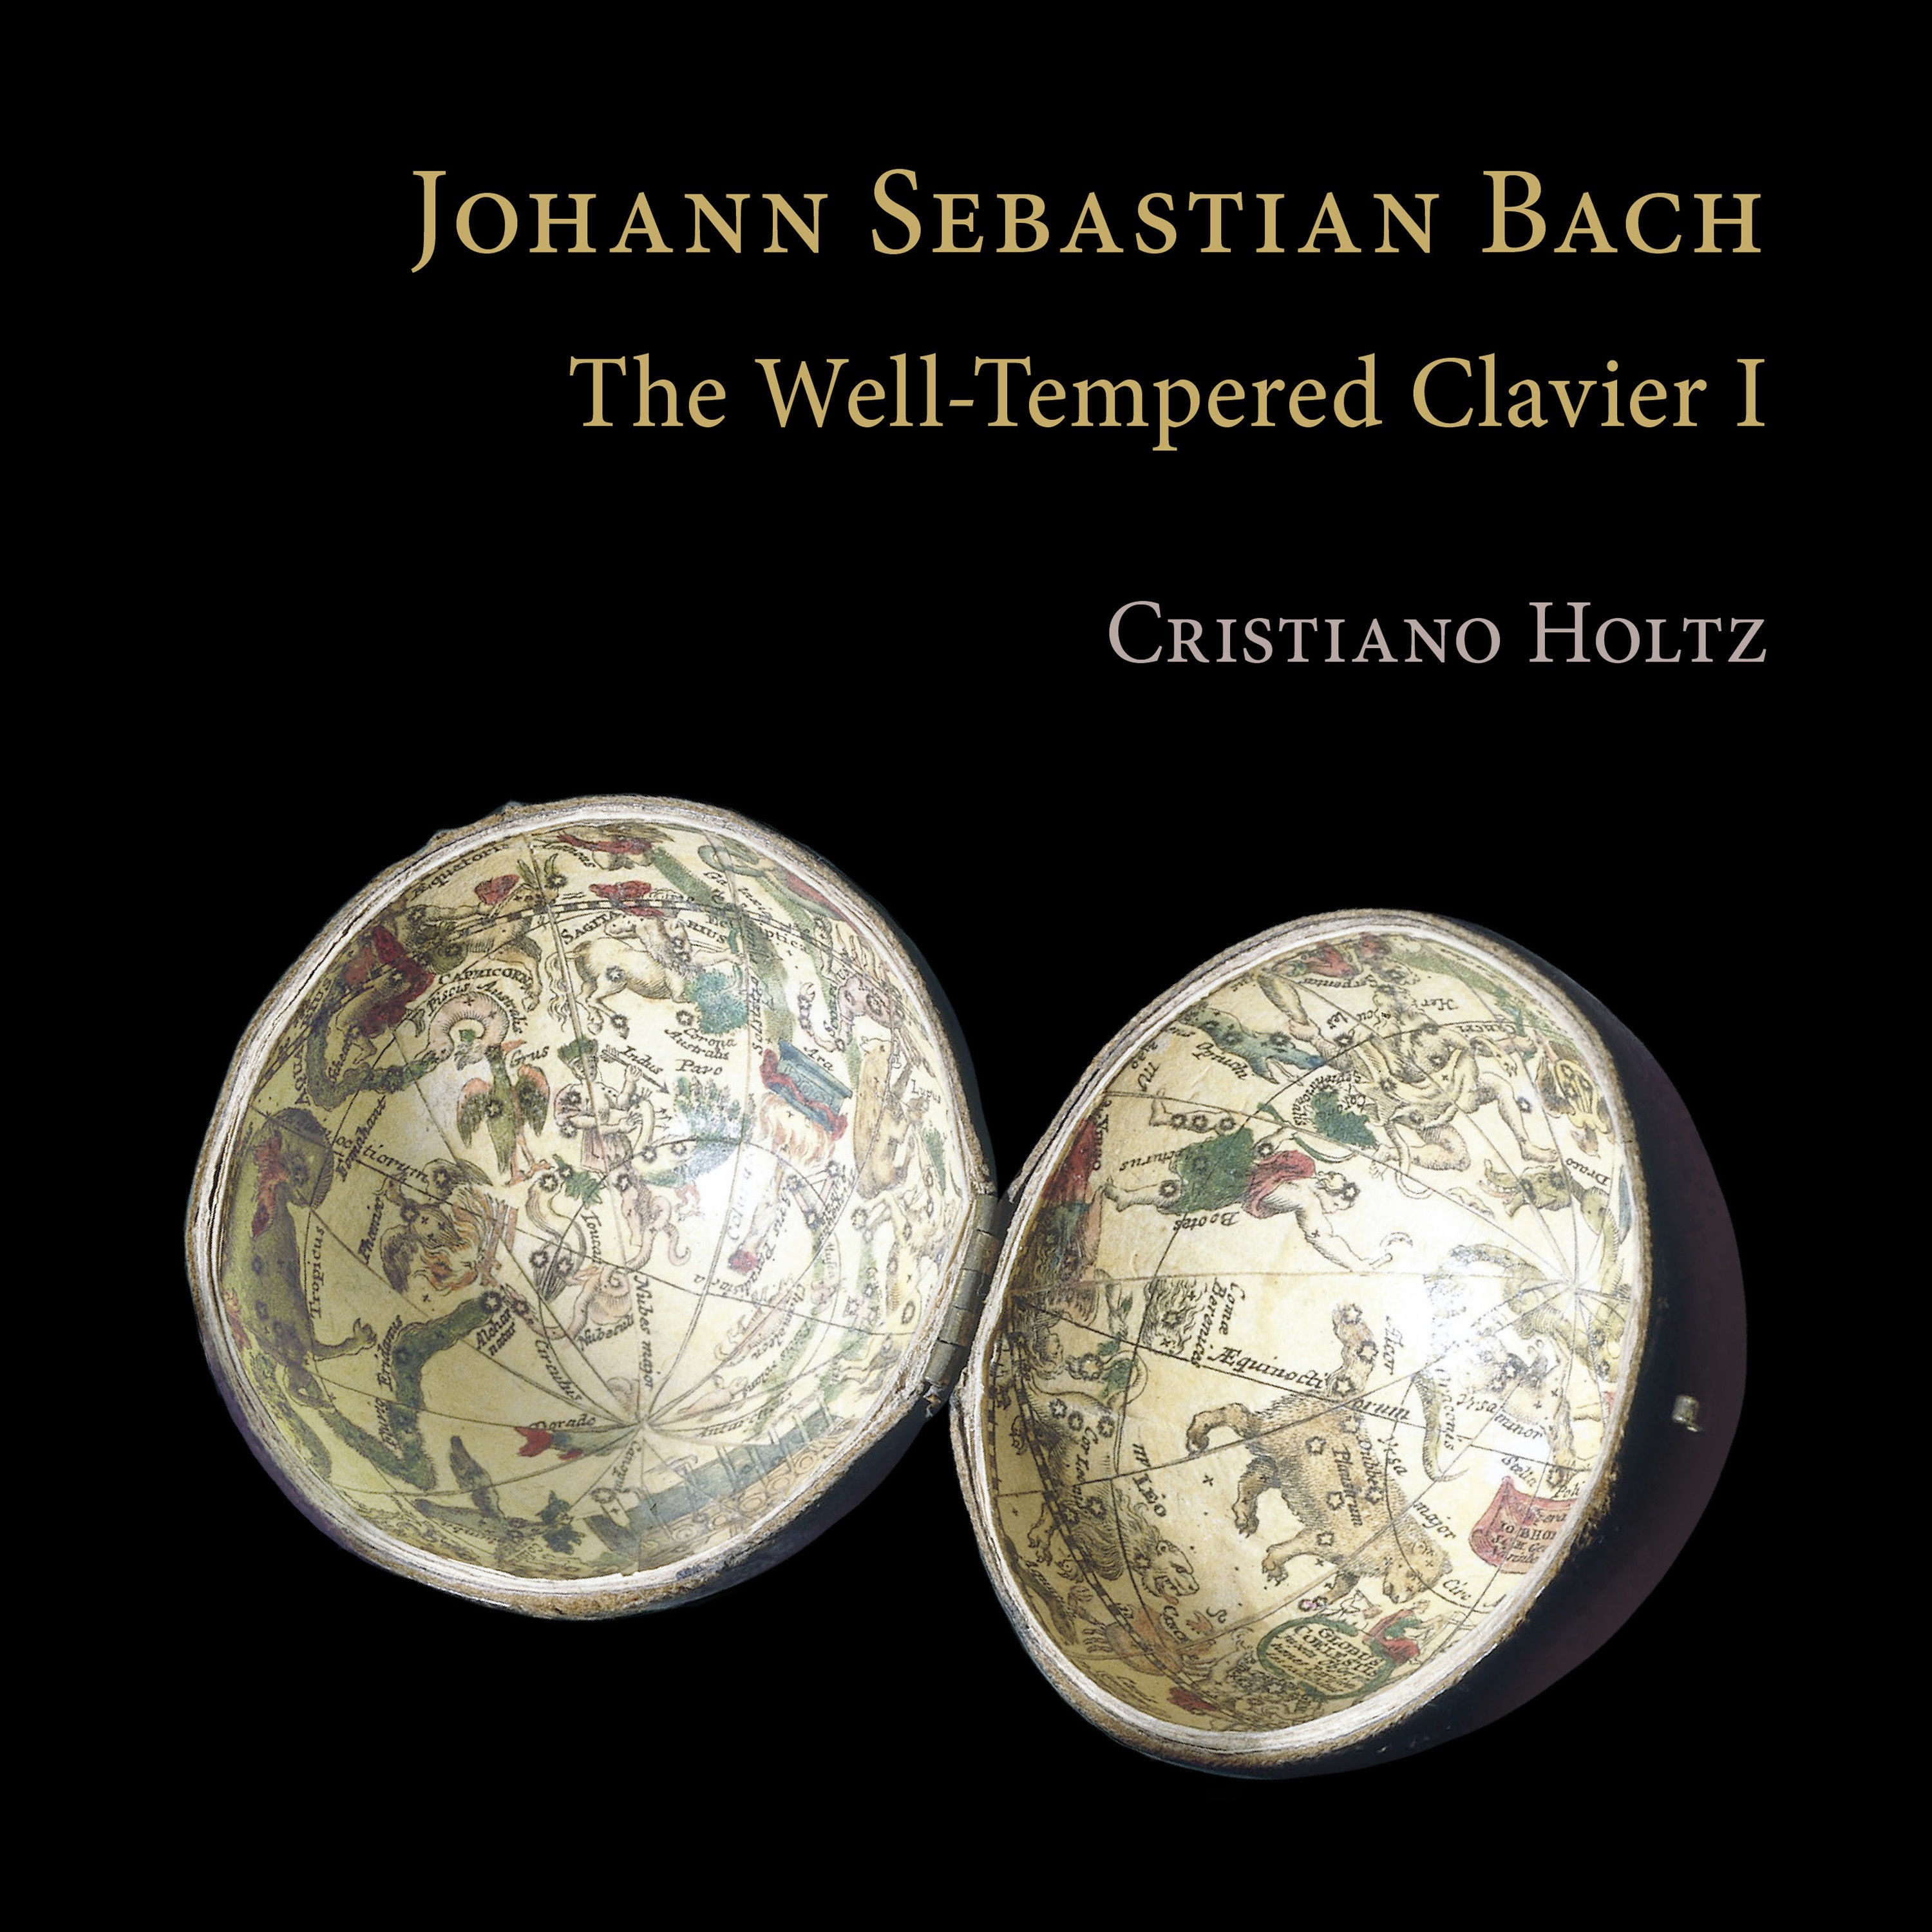 Cristiano Holtz – Bach: The Well-Tempered Clavier I (2021) [FLAC 24bit/96kHz]